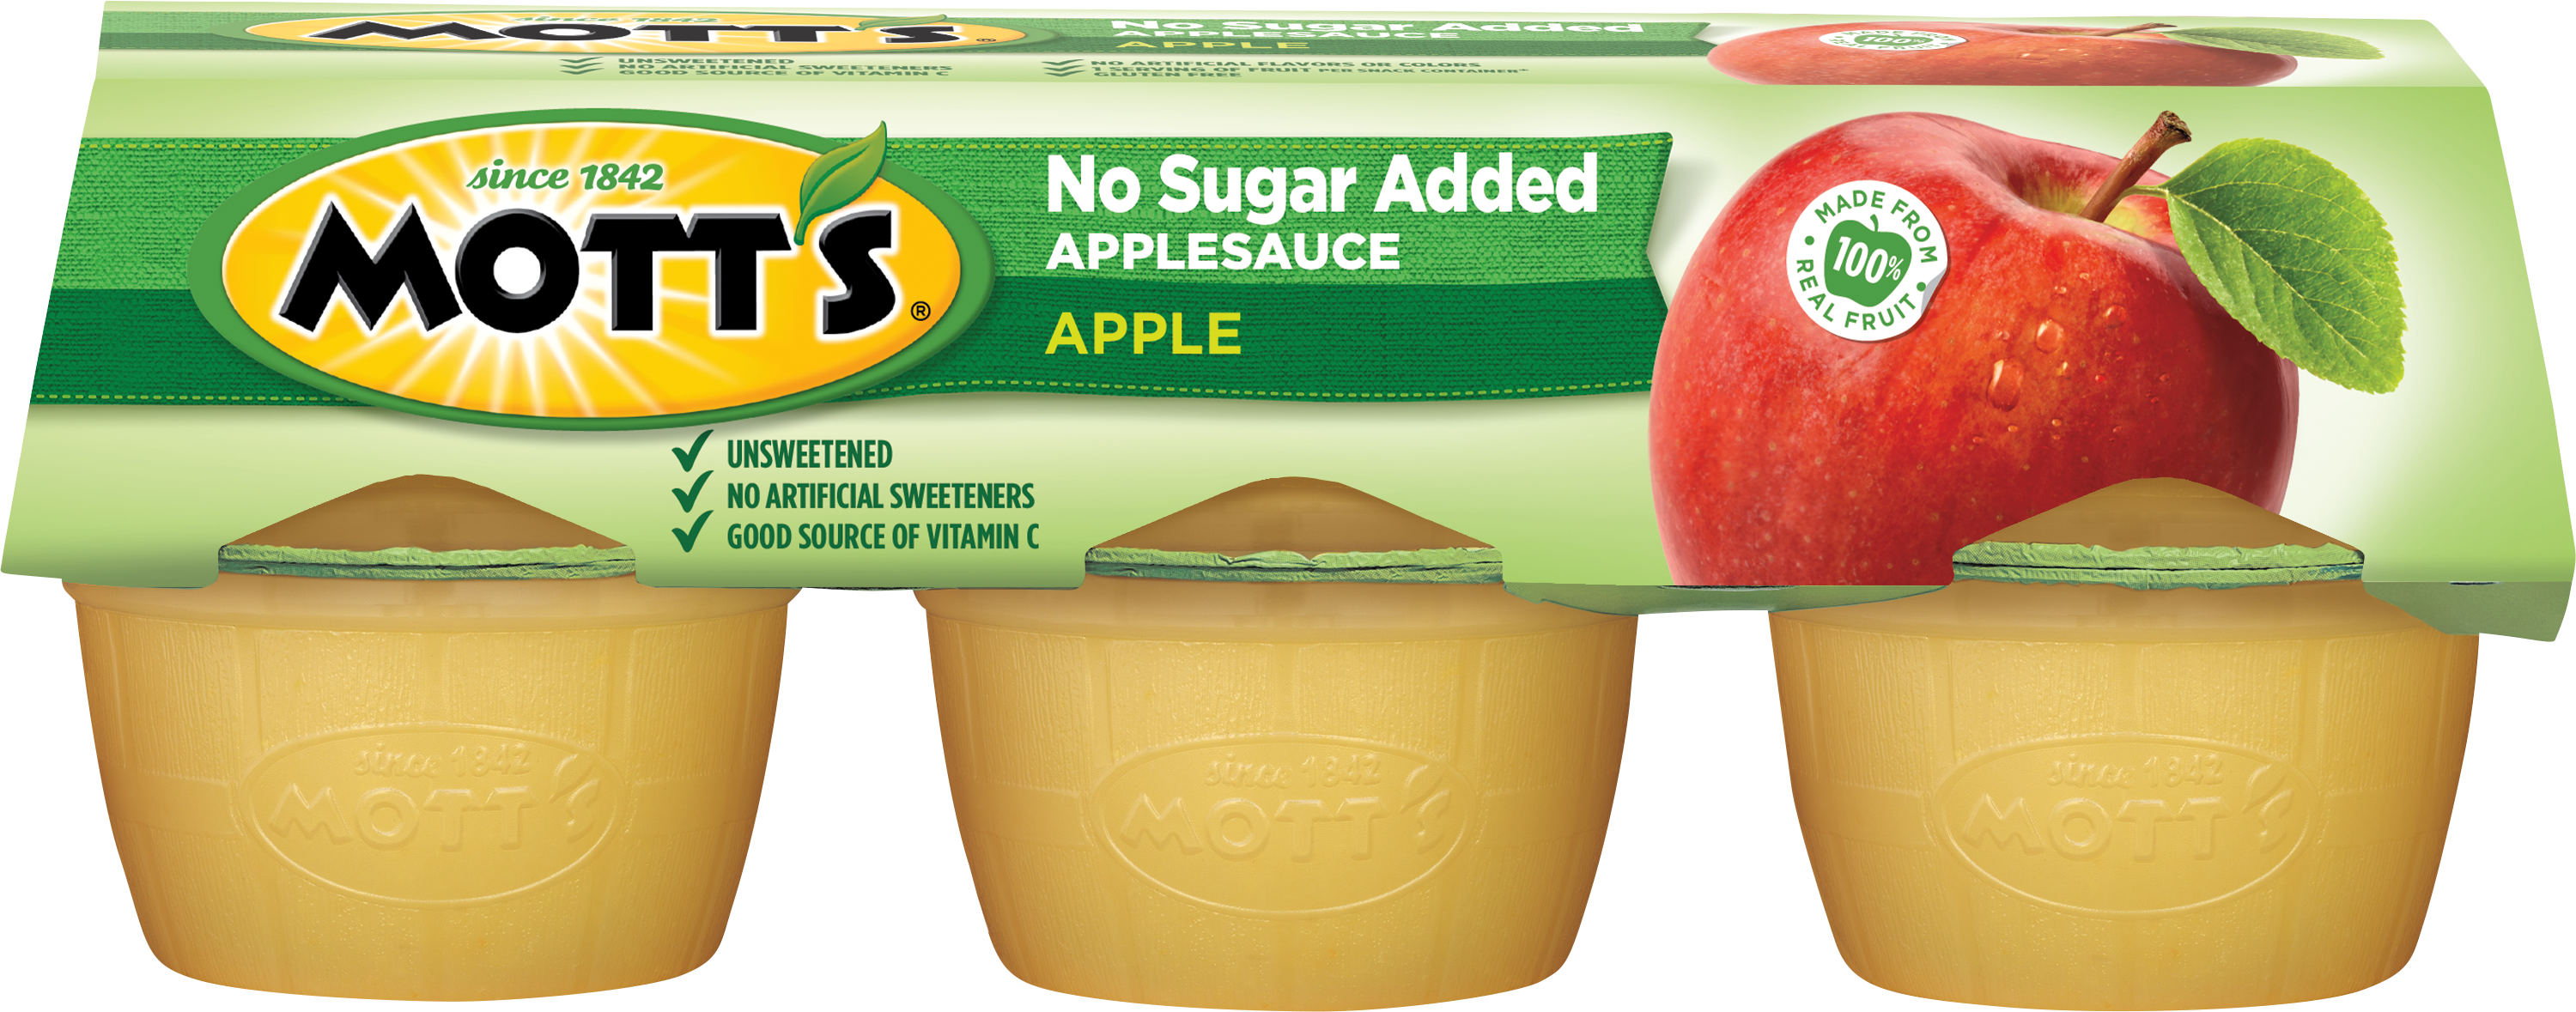 https://www.motts.com/images/products/sizes/no-sugar-added-apple-applesauce_6_cup.png